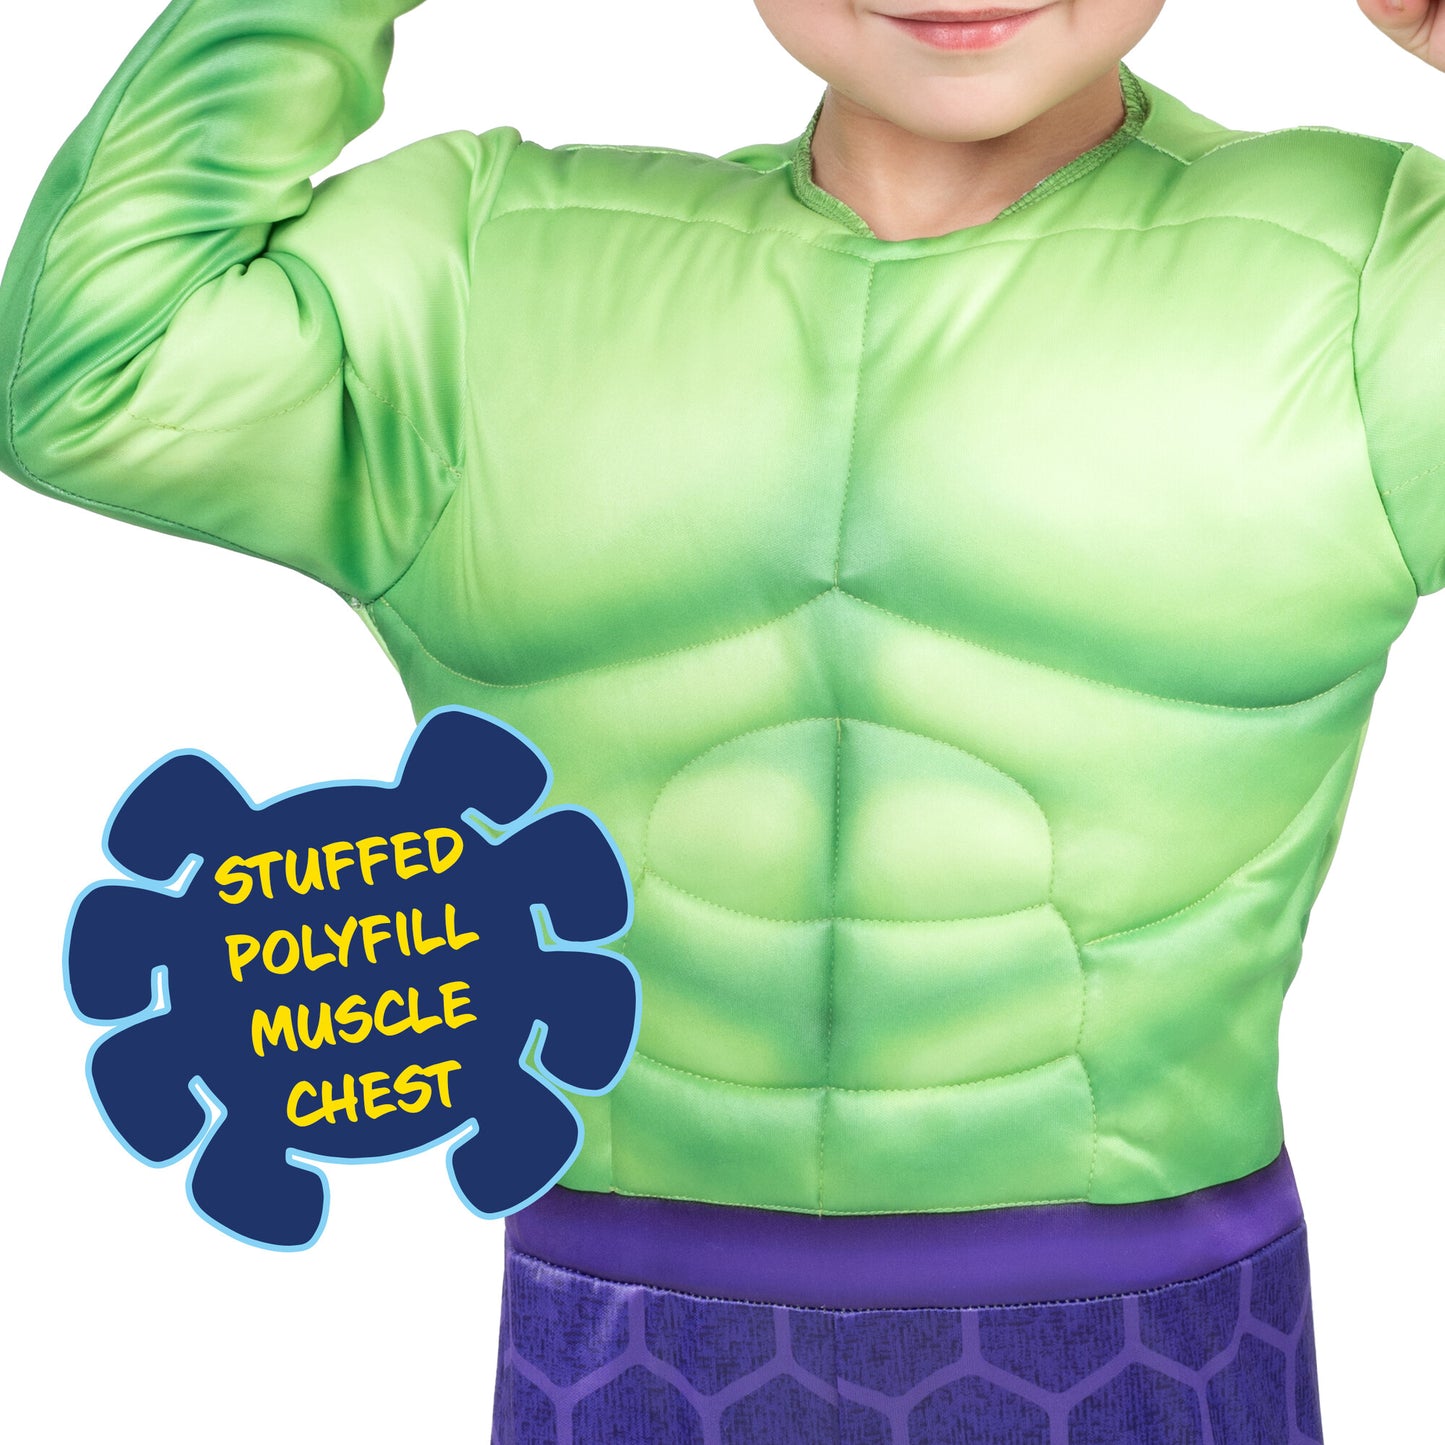 Hulk Polyfill Muscle Chest Green Toddler Marvel Costume by Jazzware Costumes only at  TeeJayTraders.com - Image 3